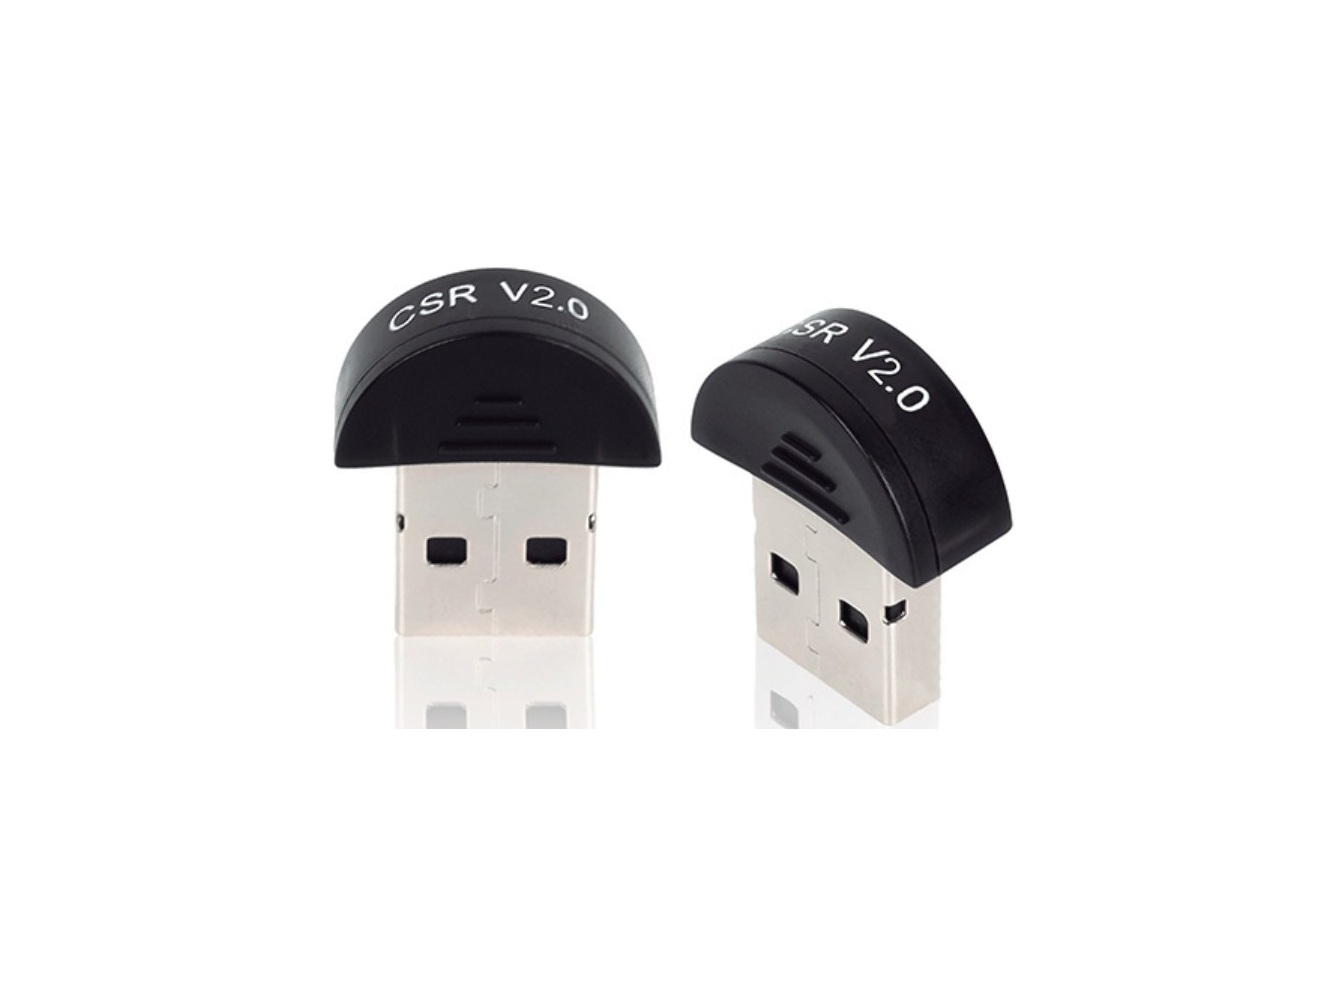 imperii Bluetooth USB Adapter User Guide